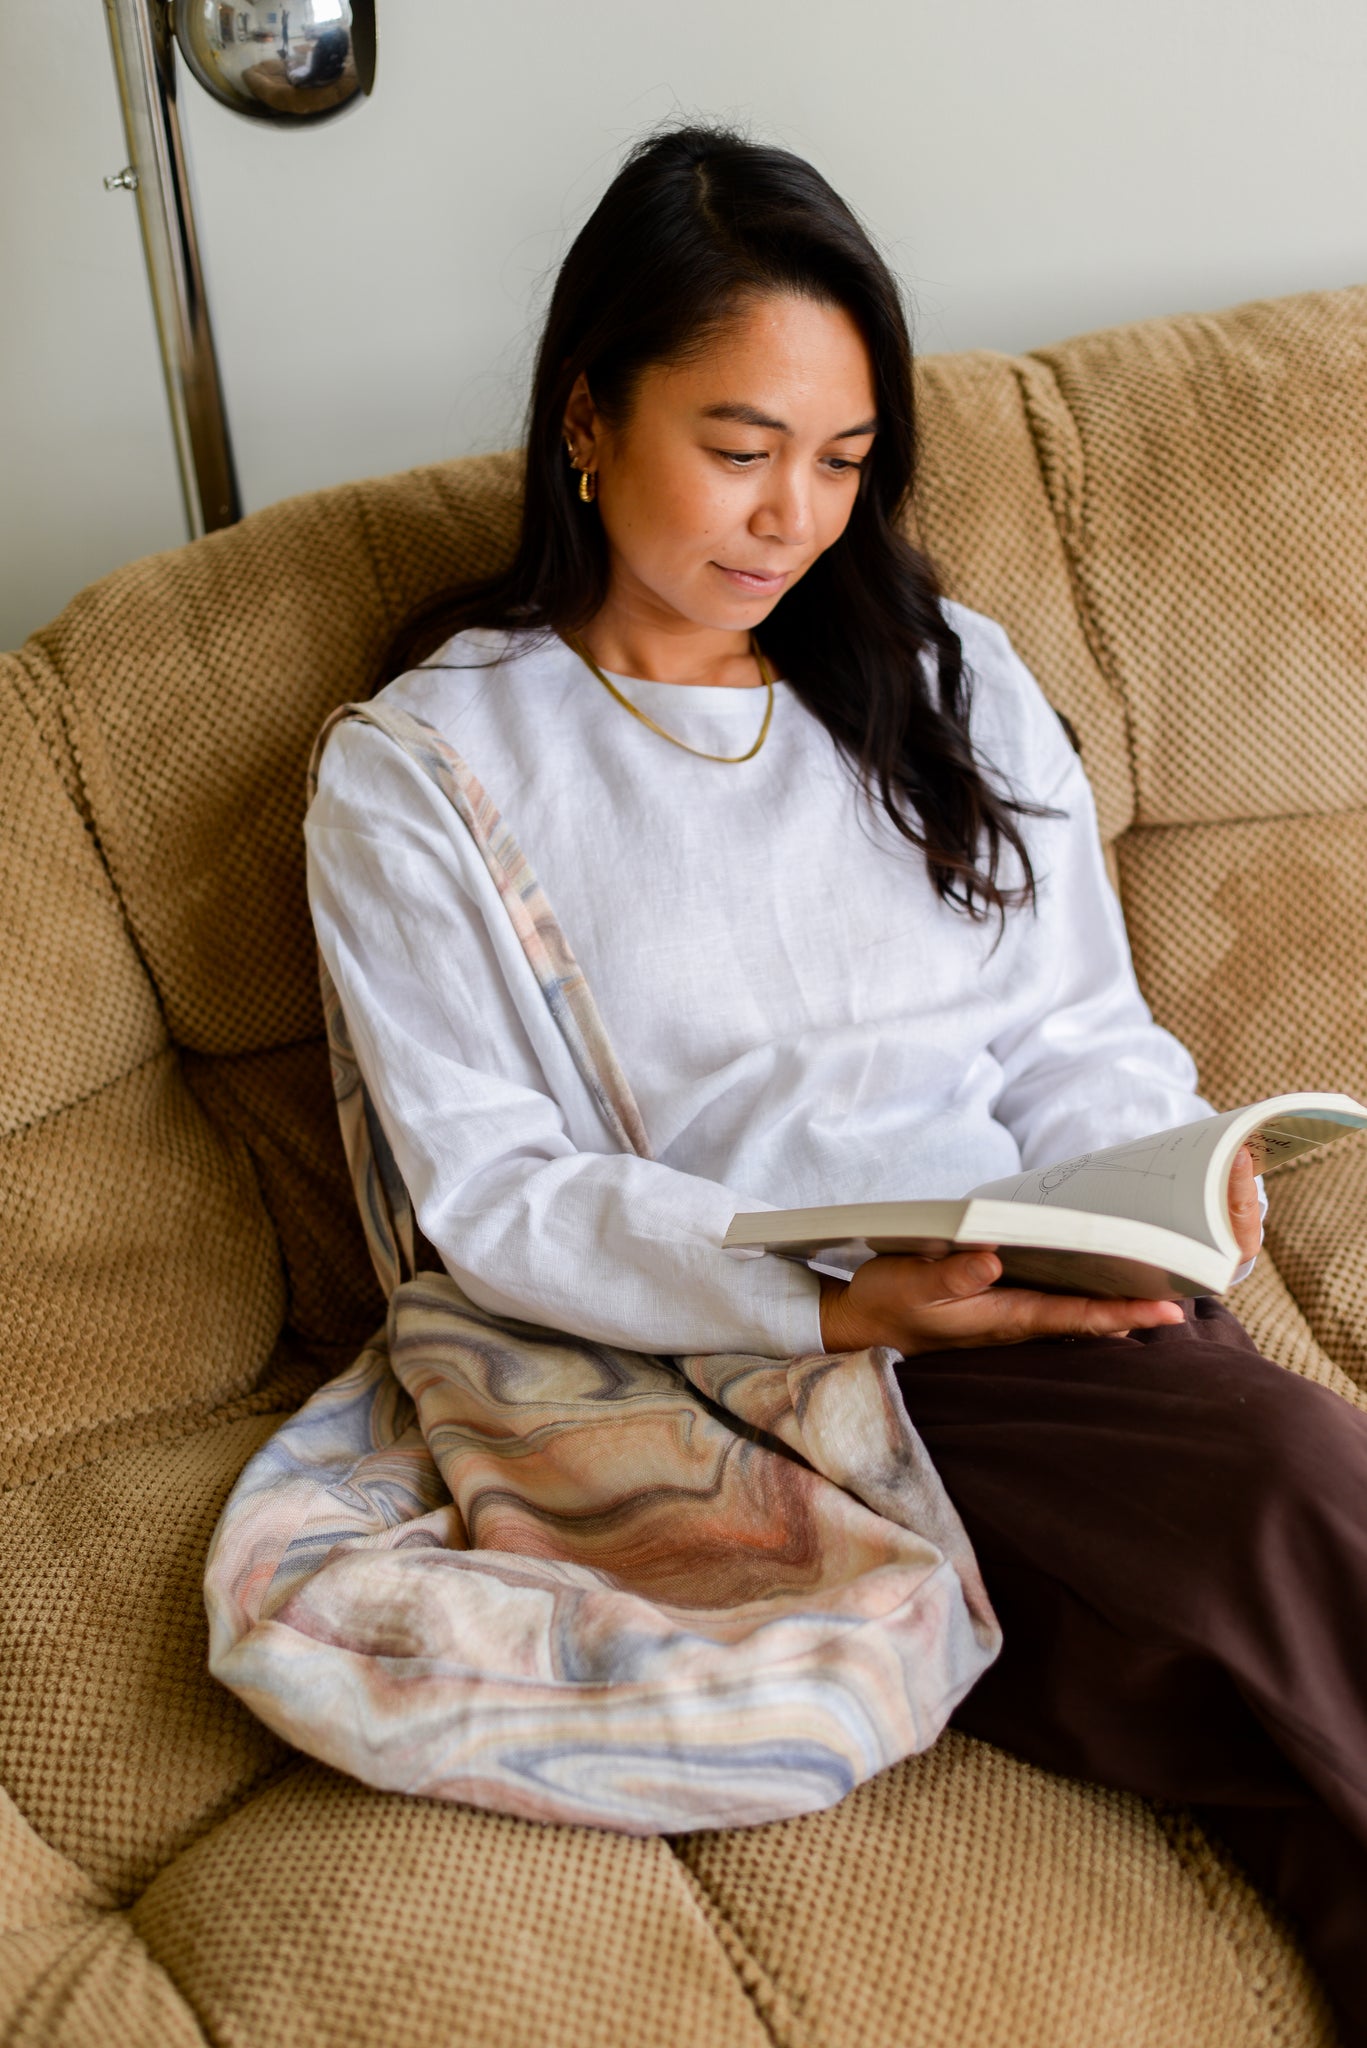 woman sitting on a couch reading wearing a white linen top and brown pants with a large printed tote